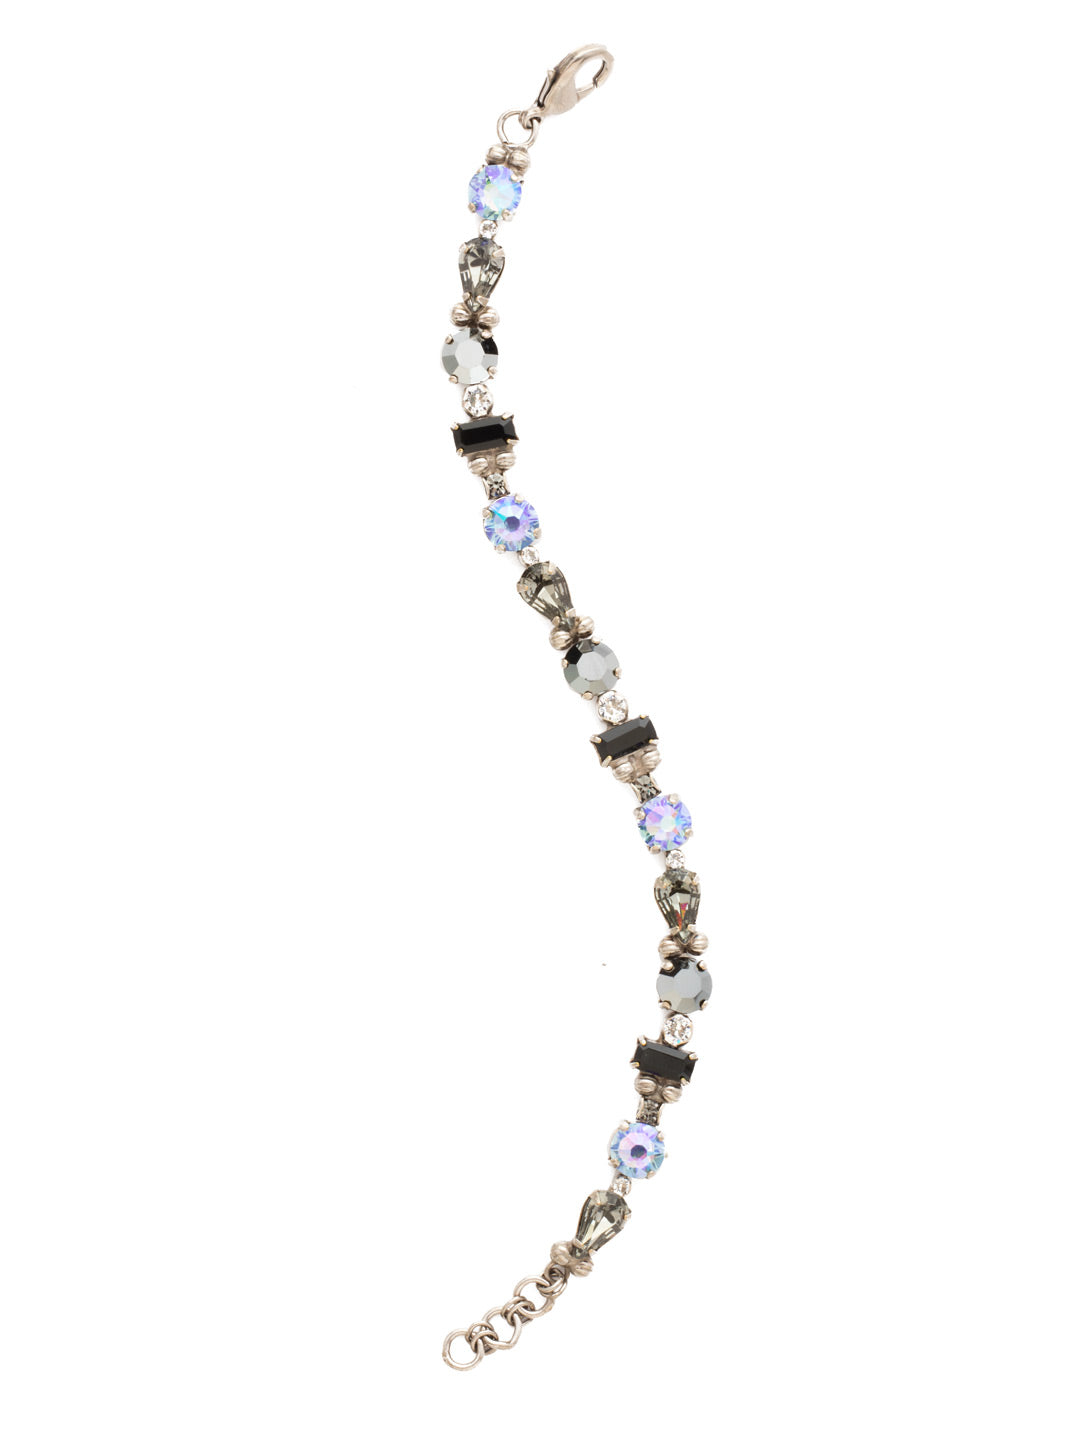 Betty Tennis Bracelet - BDX11ASBLT - Detailed with geo-metric shaped cyrstals. From Sorrelli's Black Tie collection in our Antique Silver-tone finish.